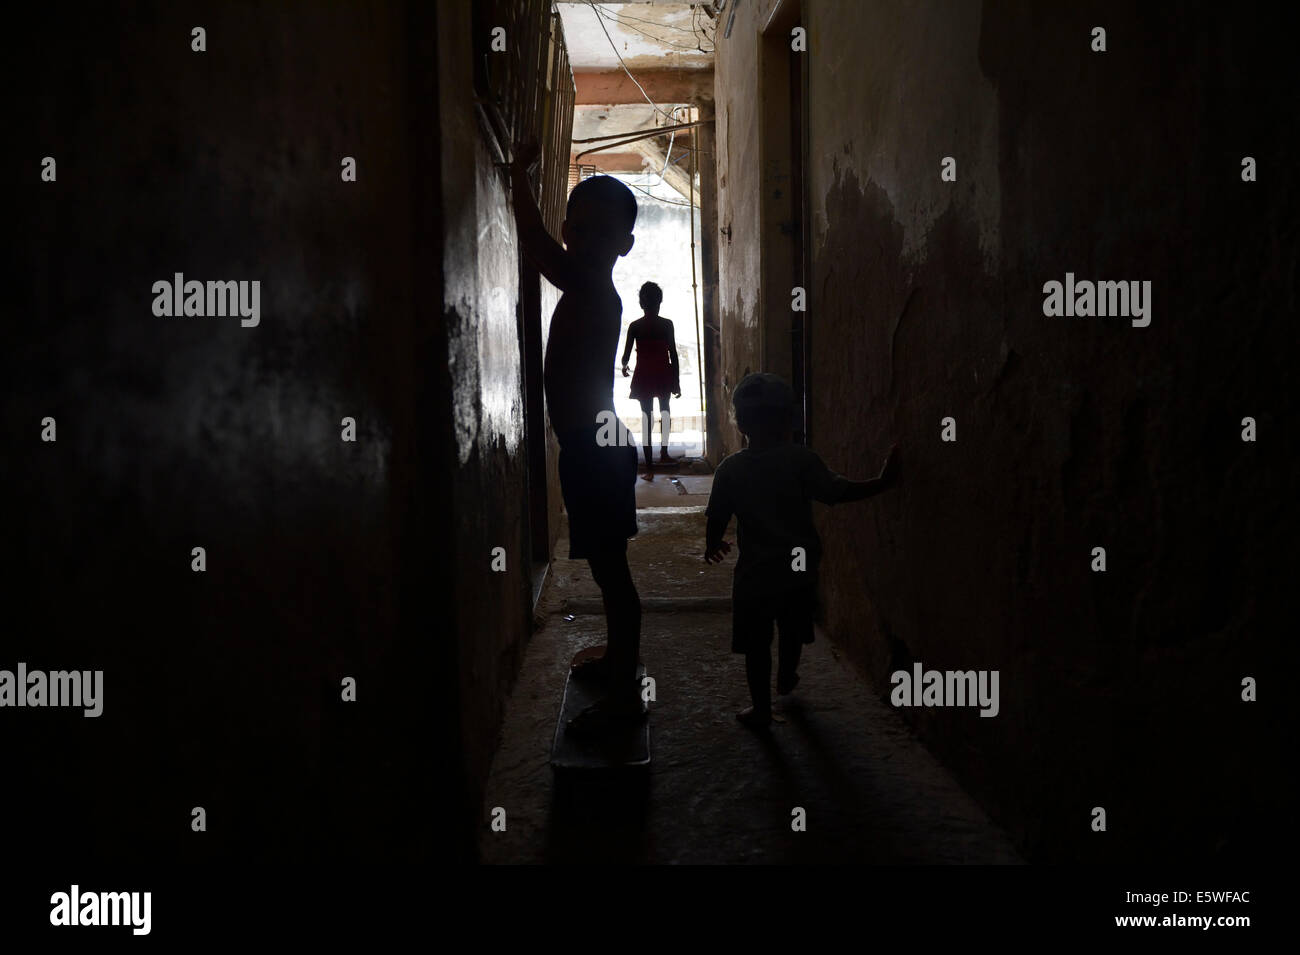 Children playing in the hallway of a squat or occupied house, Gloria district, Rio de Janeiro, Rio de Janeiro State, Brazil Stock Photo